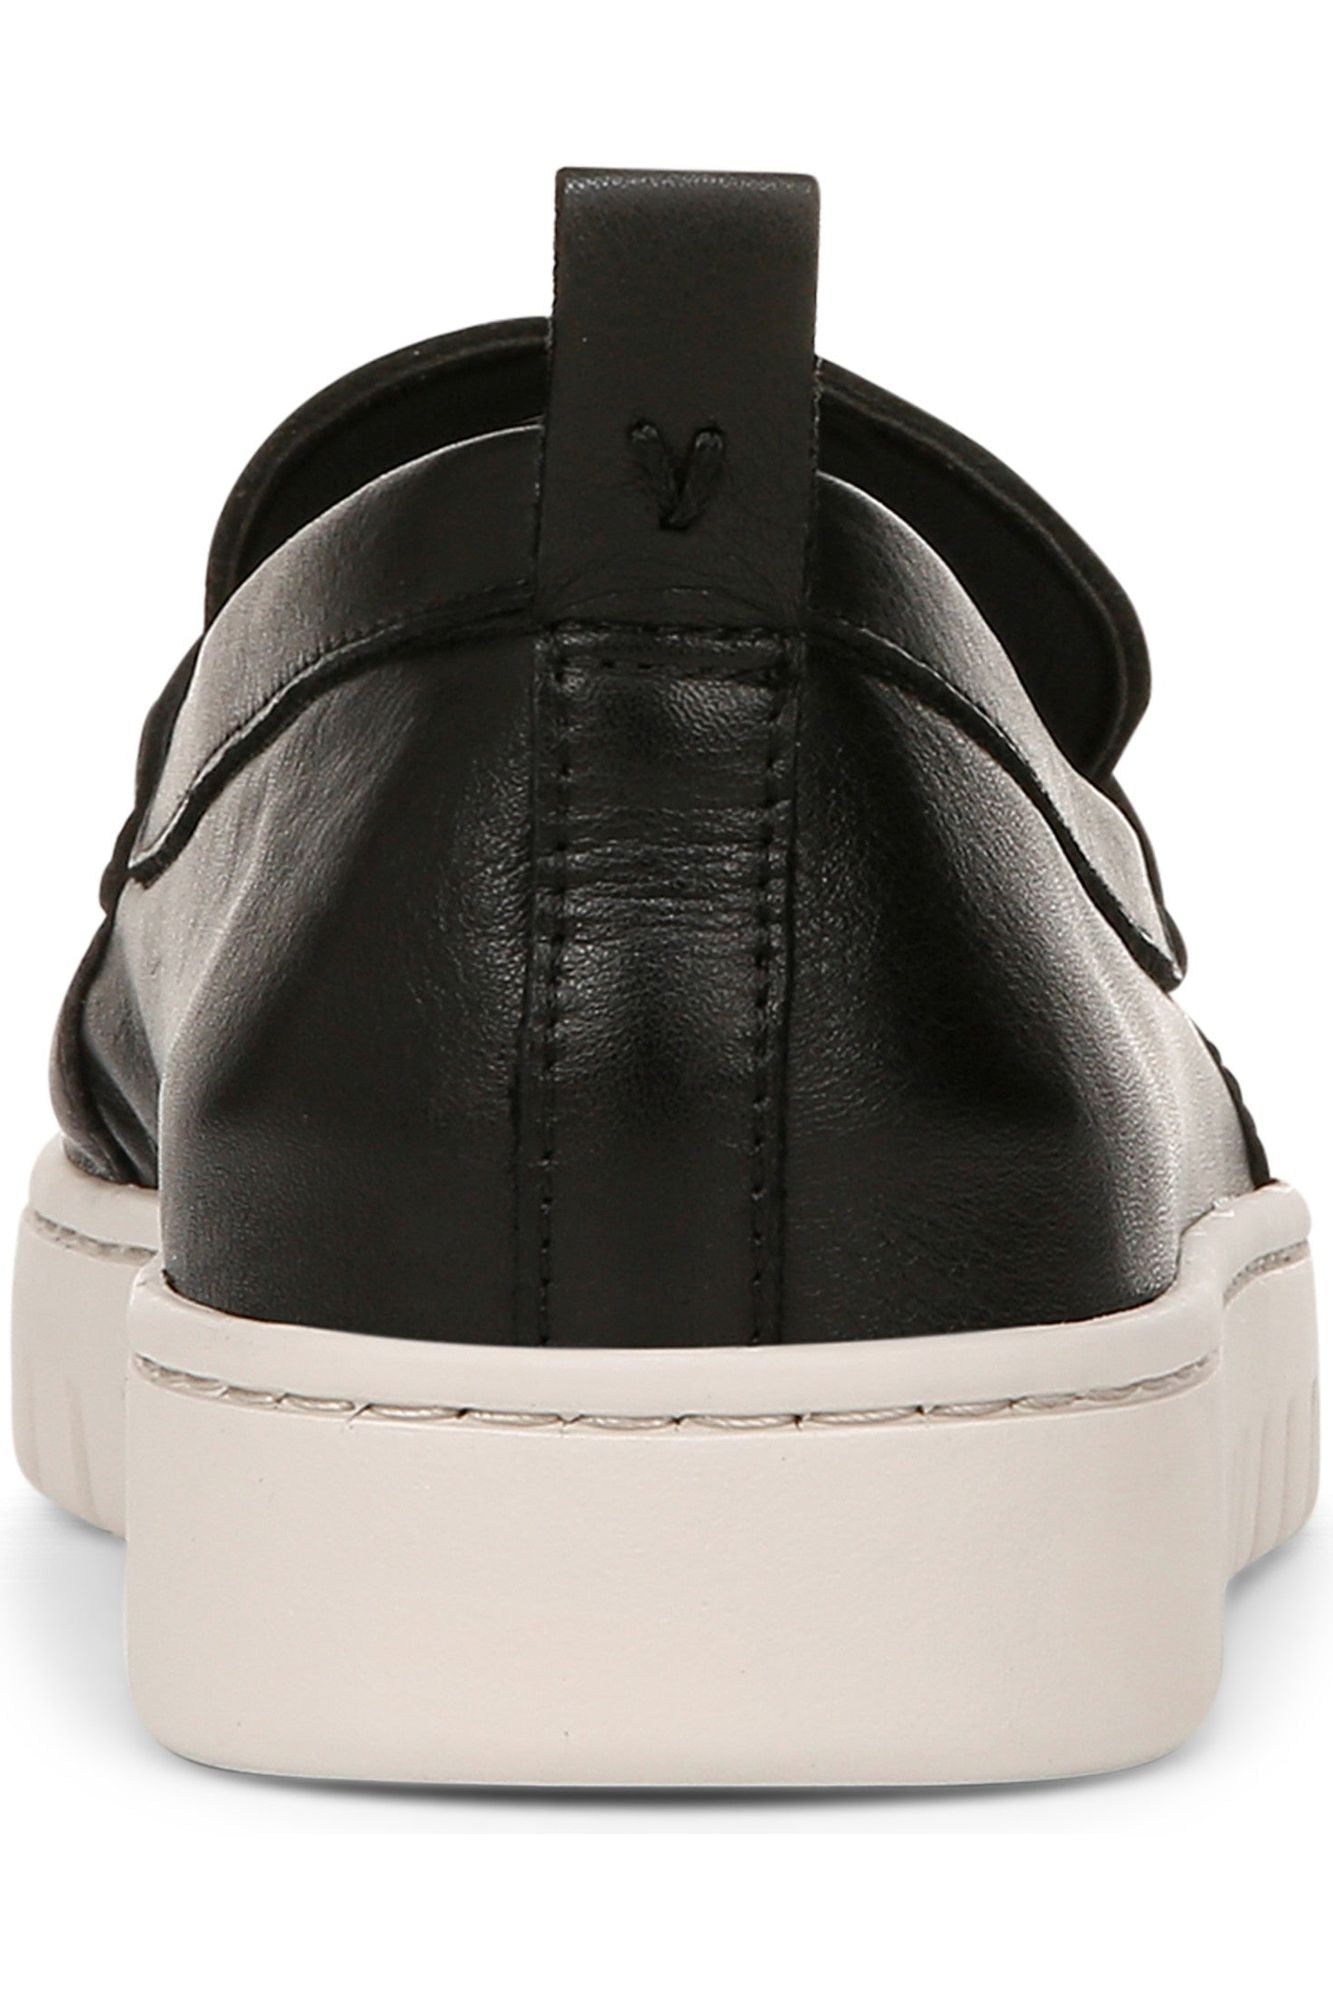 Vionic Leather Loafer - Style UPTOWN, back